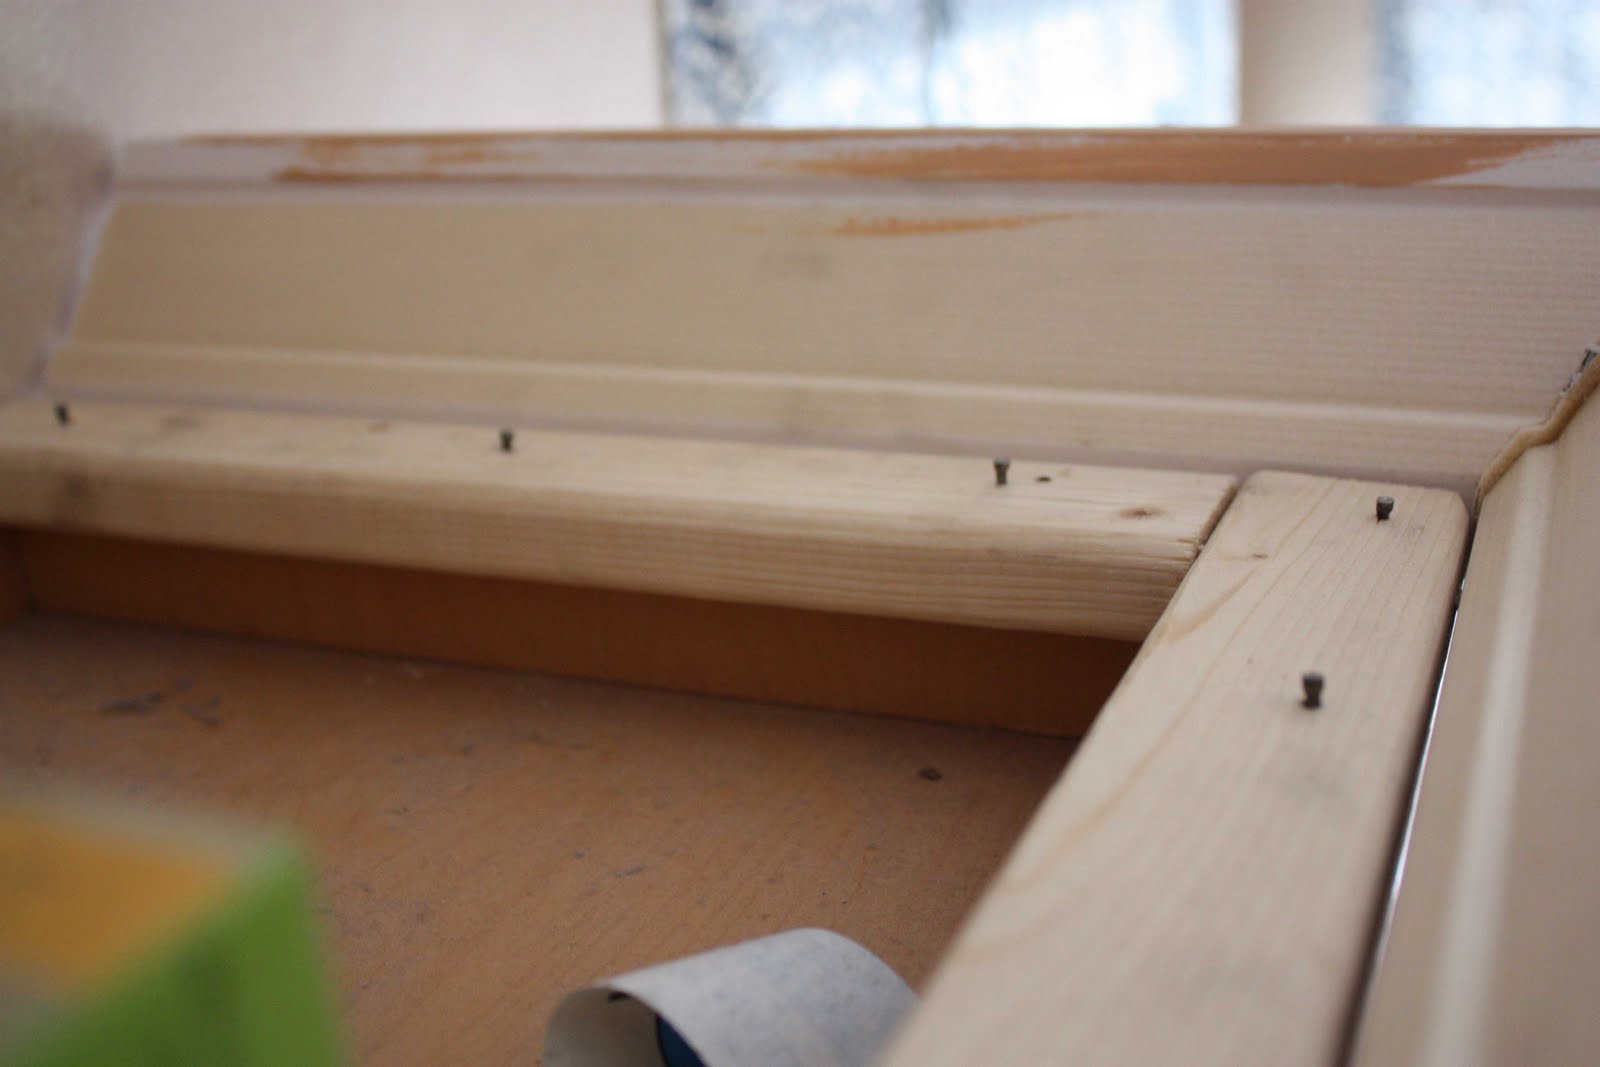 How To Put Crown Moulding On Kitchen Cabinets